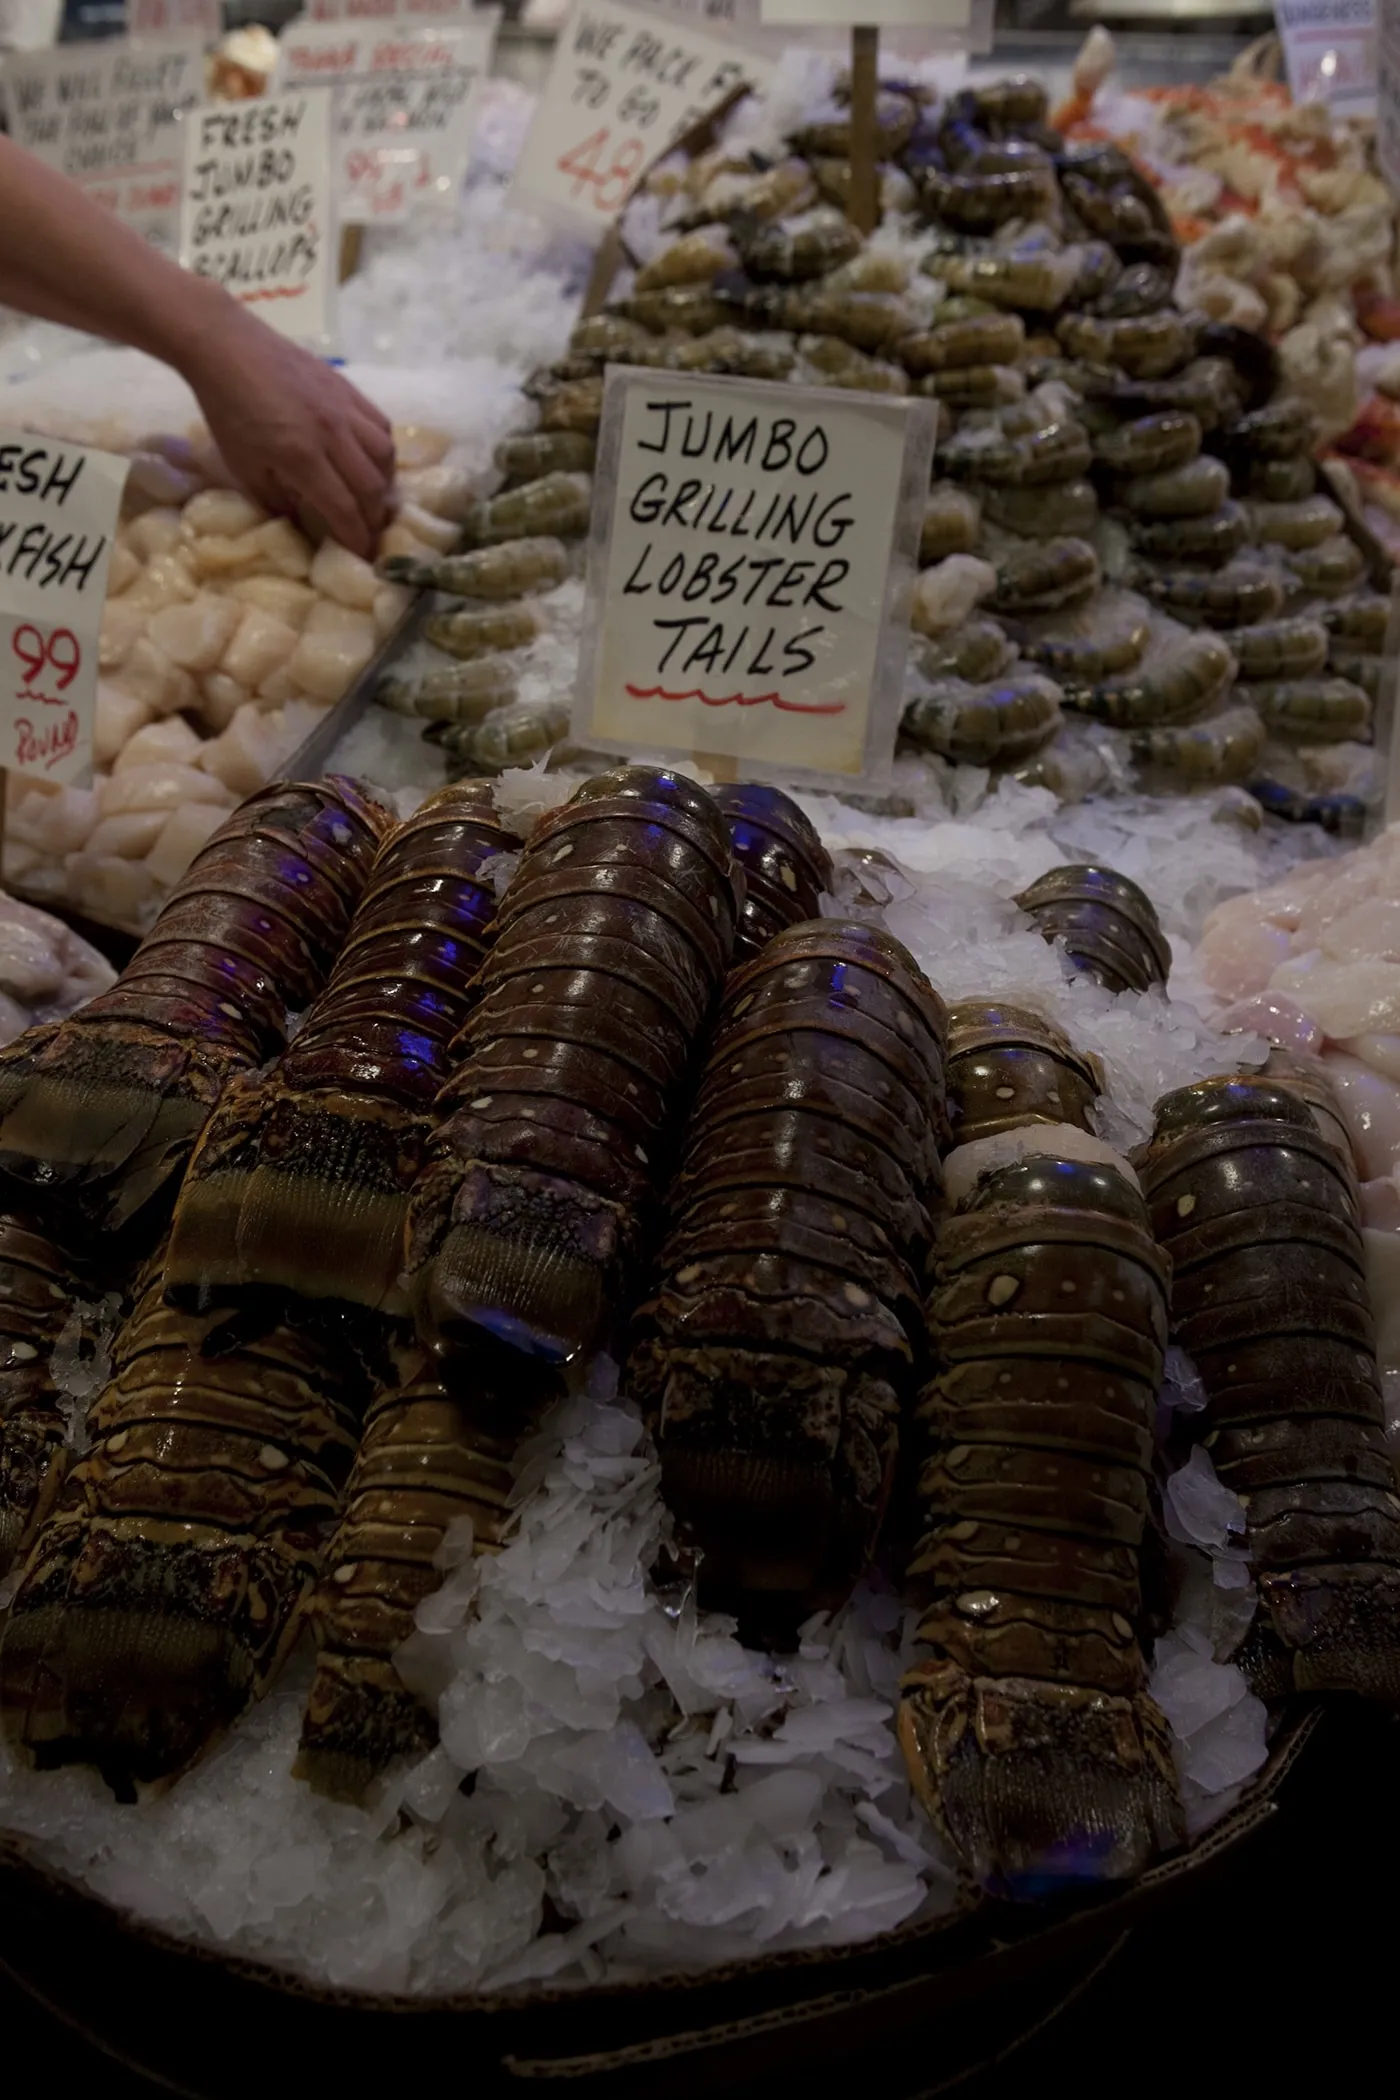 Jumbo grilling lobster tails for sale at Pike Place Market in Seattle, Washington.